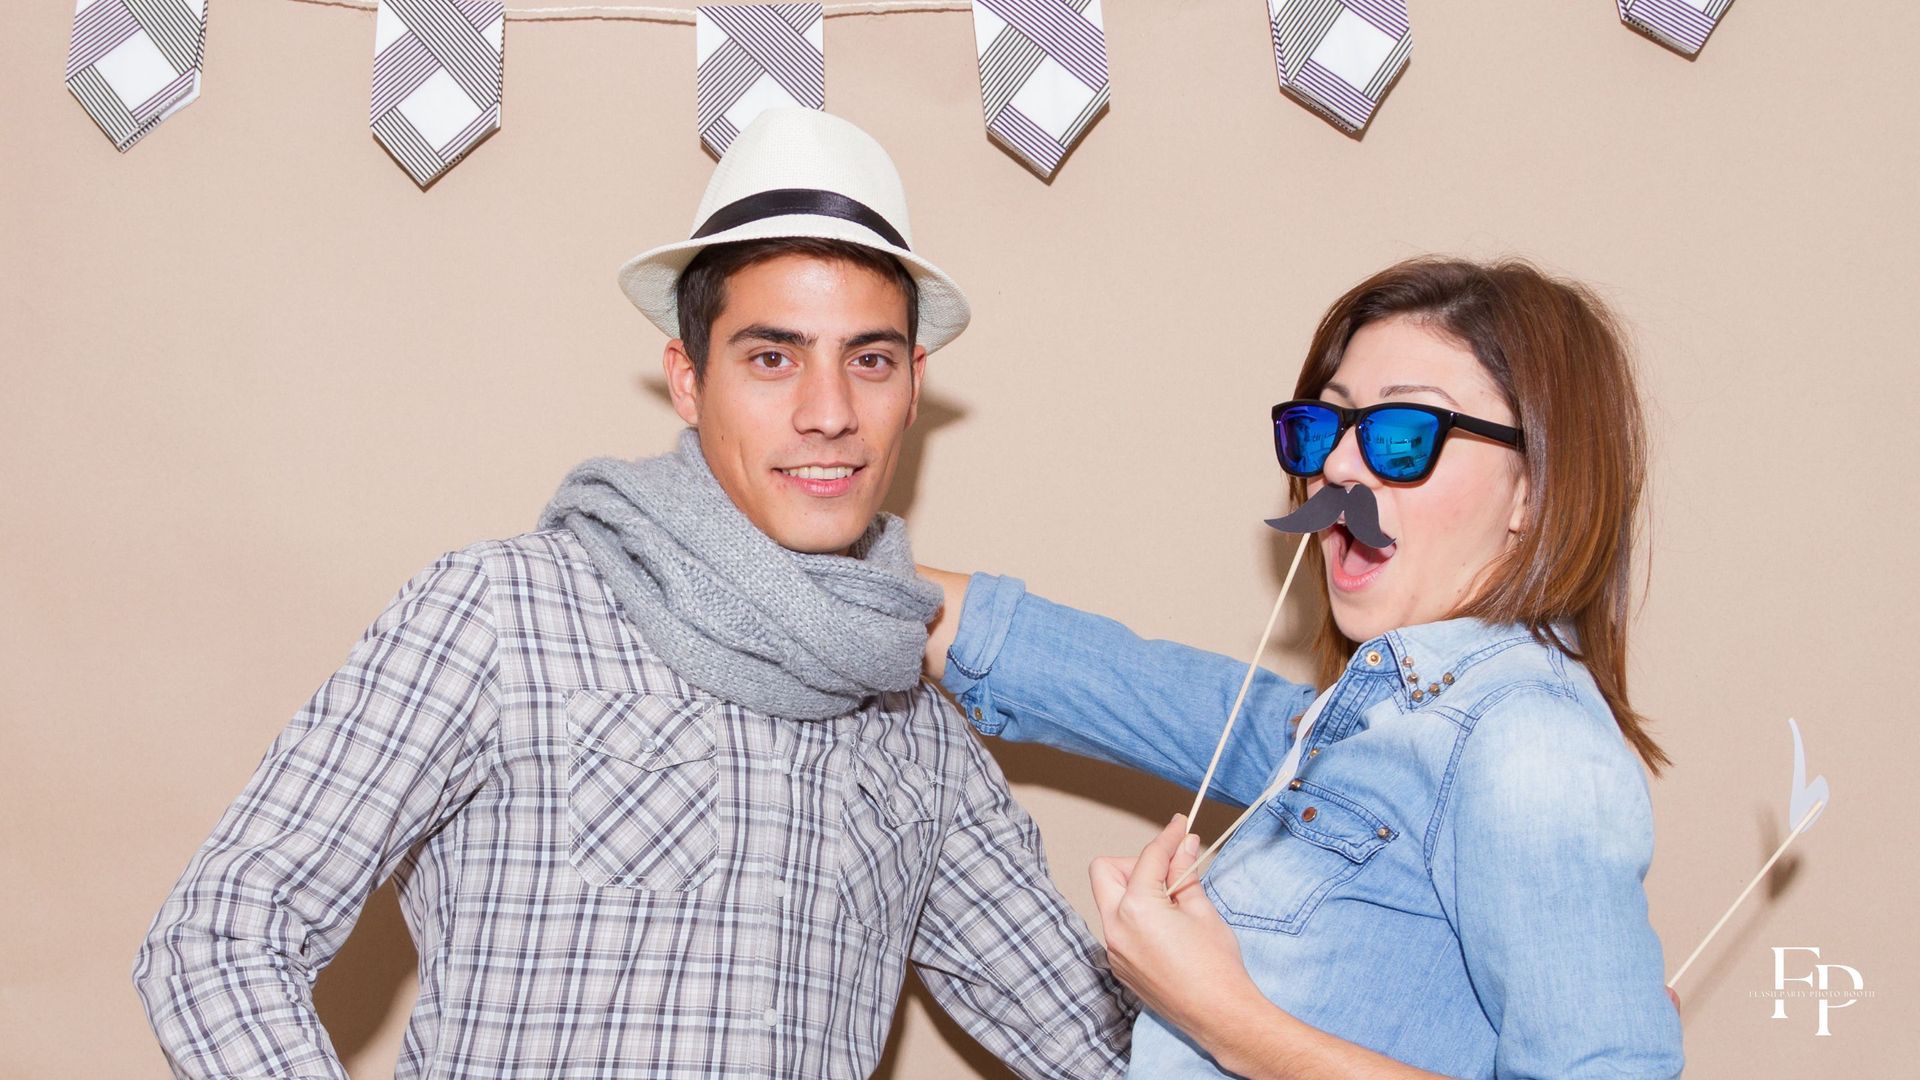 A man and woman strike poses and enjoy the convention with Flash Party's photo booth